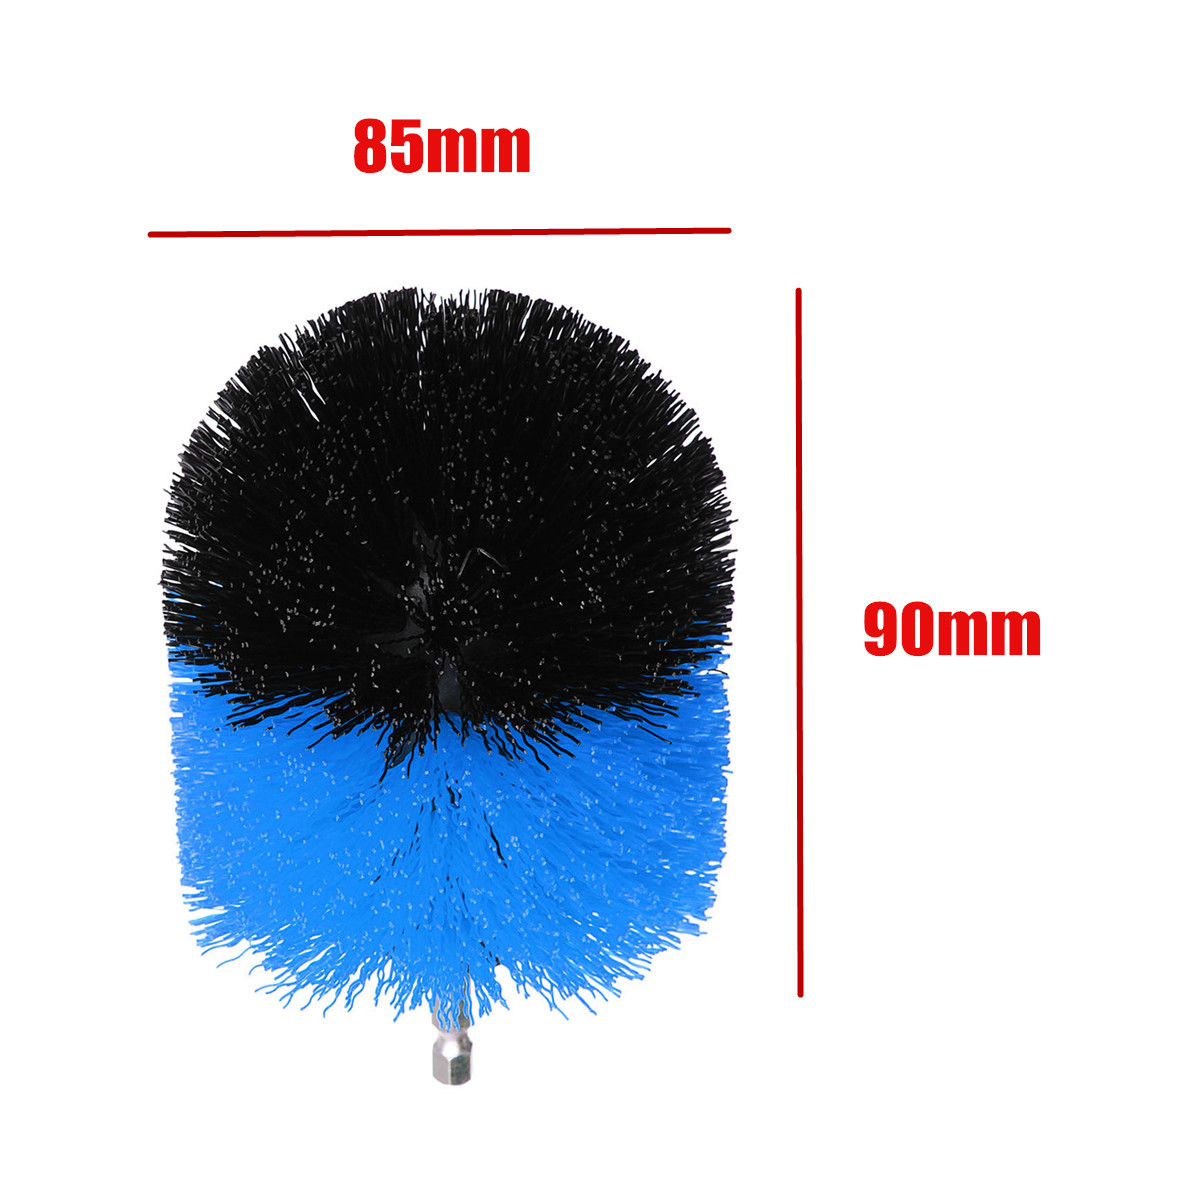 35-Inch-Drill-Cleaning-Ball-Brush-Power-Scrubber-Bathroom-Tub-Tile-Cleaning-Tool-1329638-1